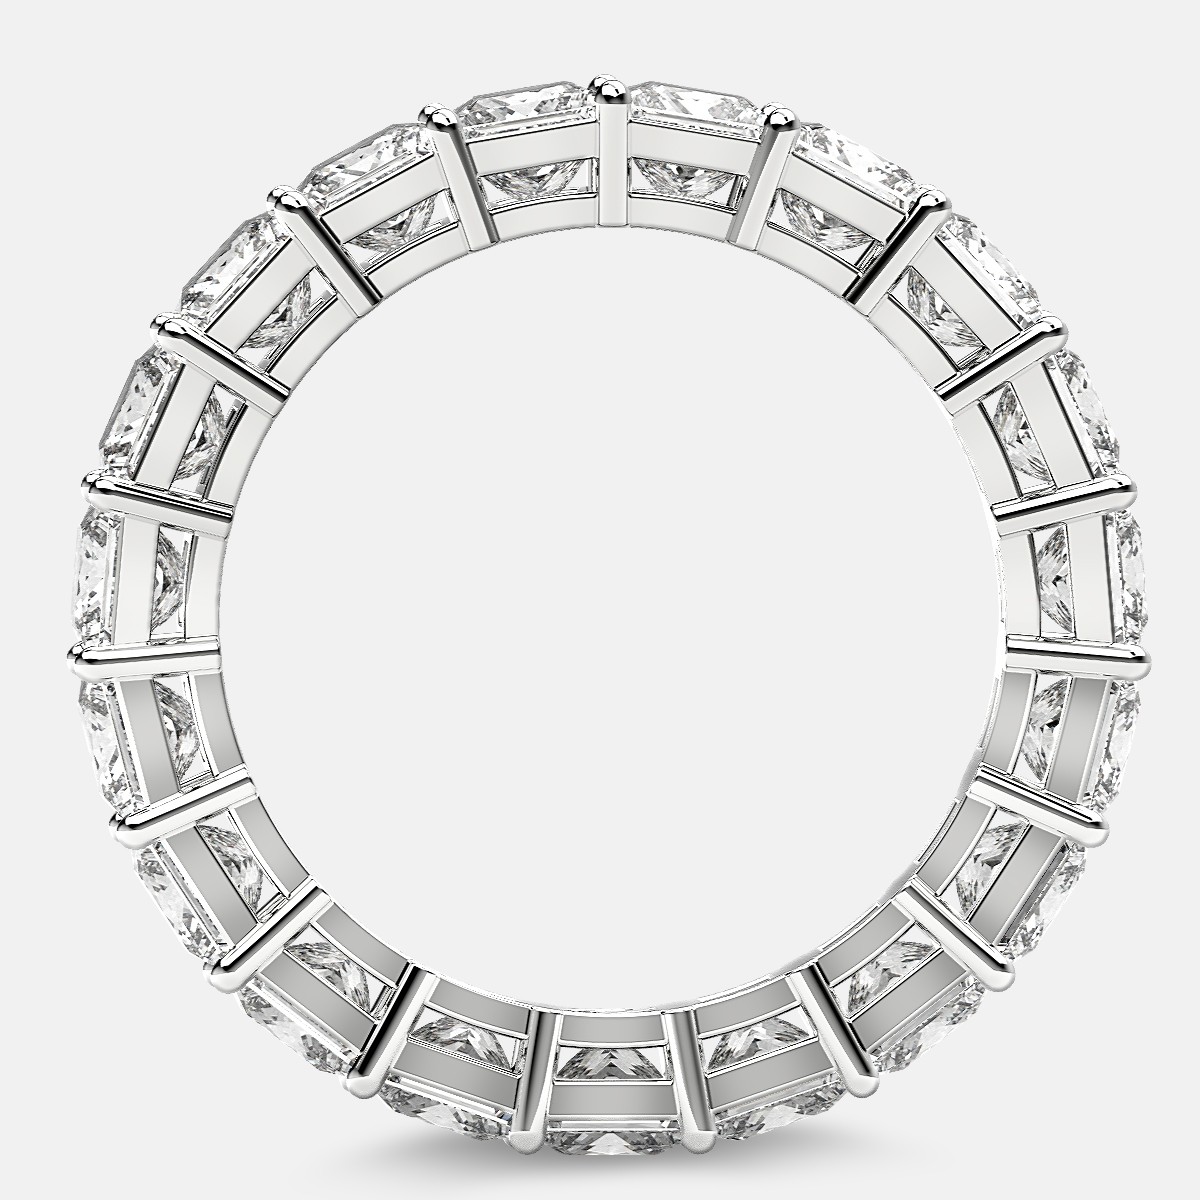 Eternity Ring with Prong Set Princess Cut Diamonds in 18k White Gold